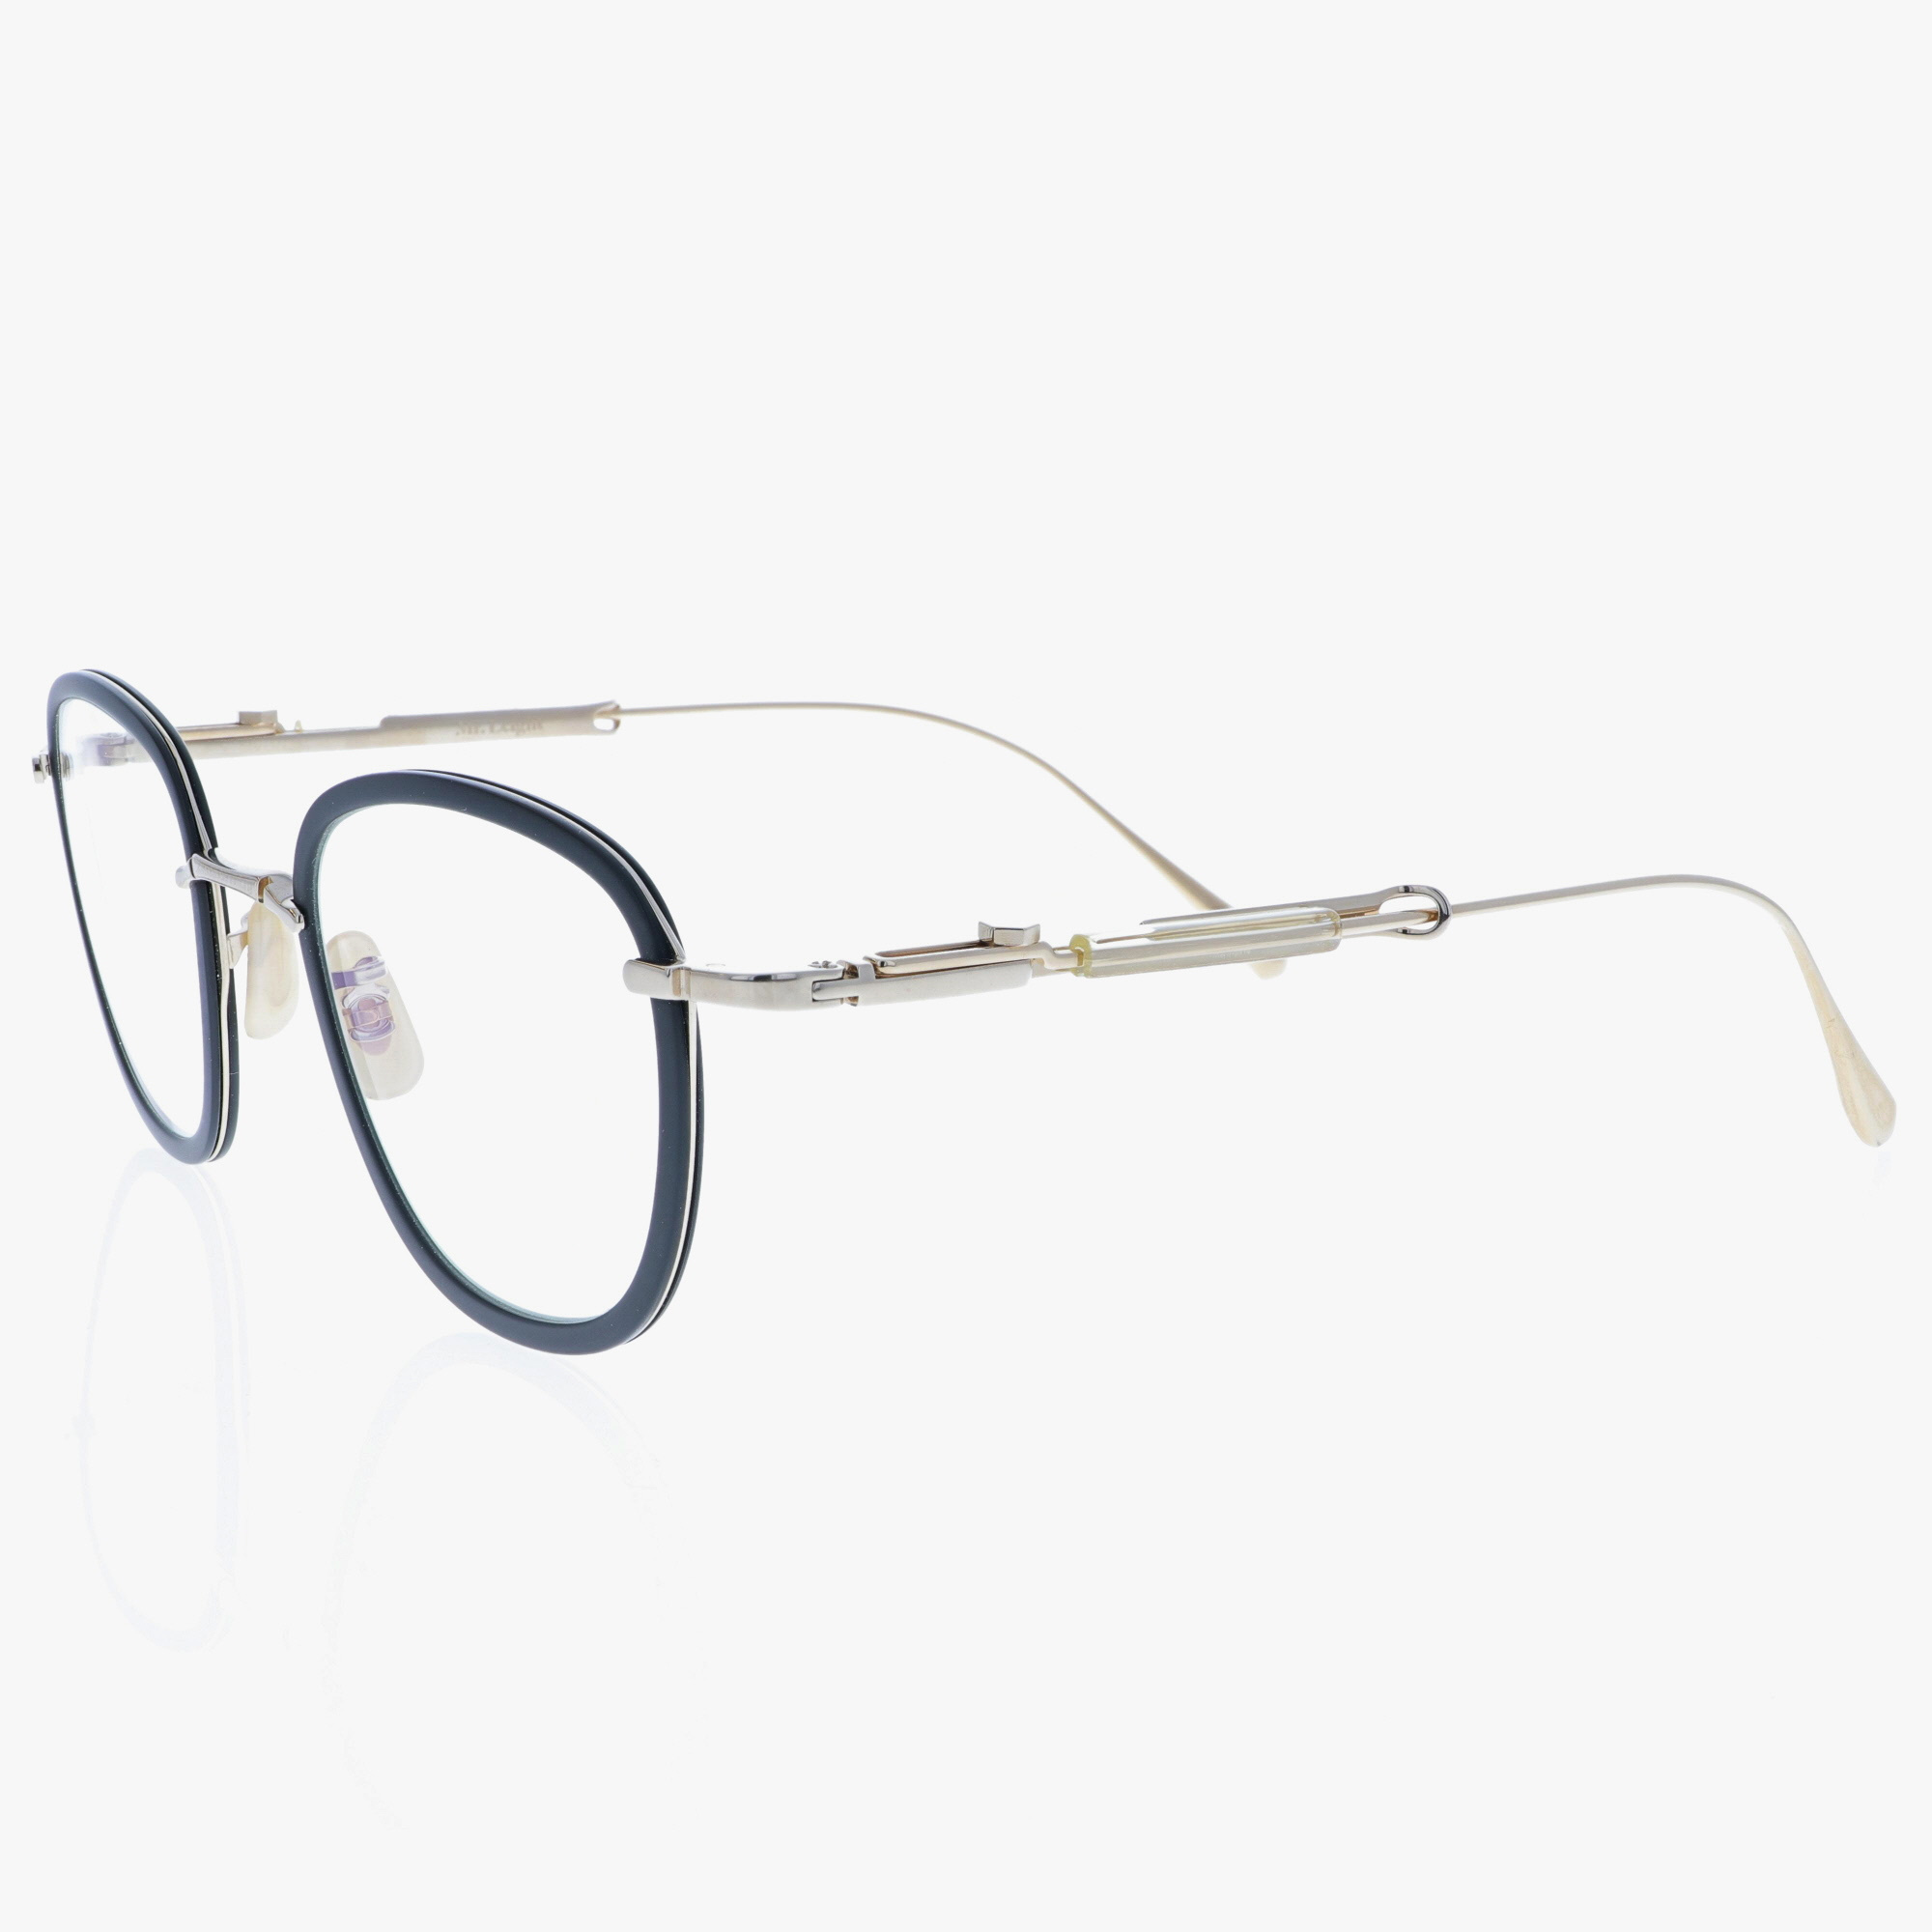 MR. LEIGHT / GRIFFITH CL / BLACK